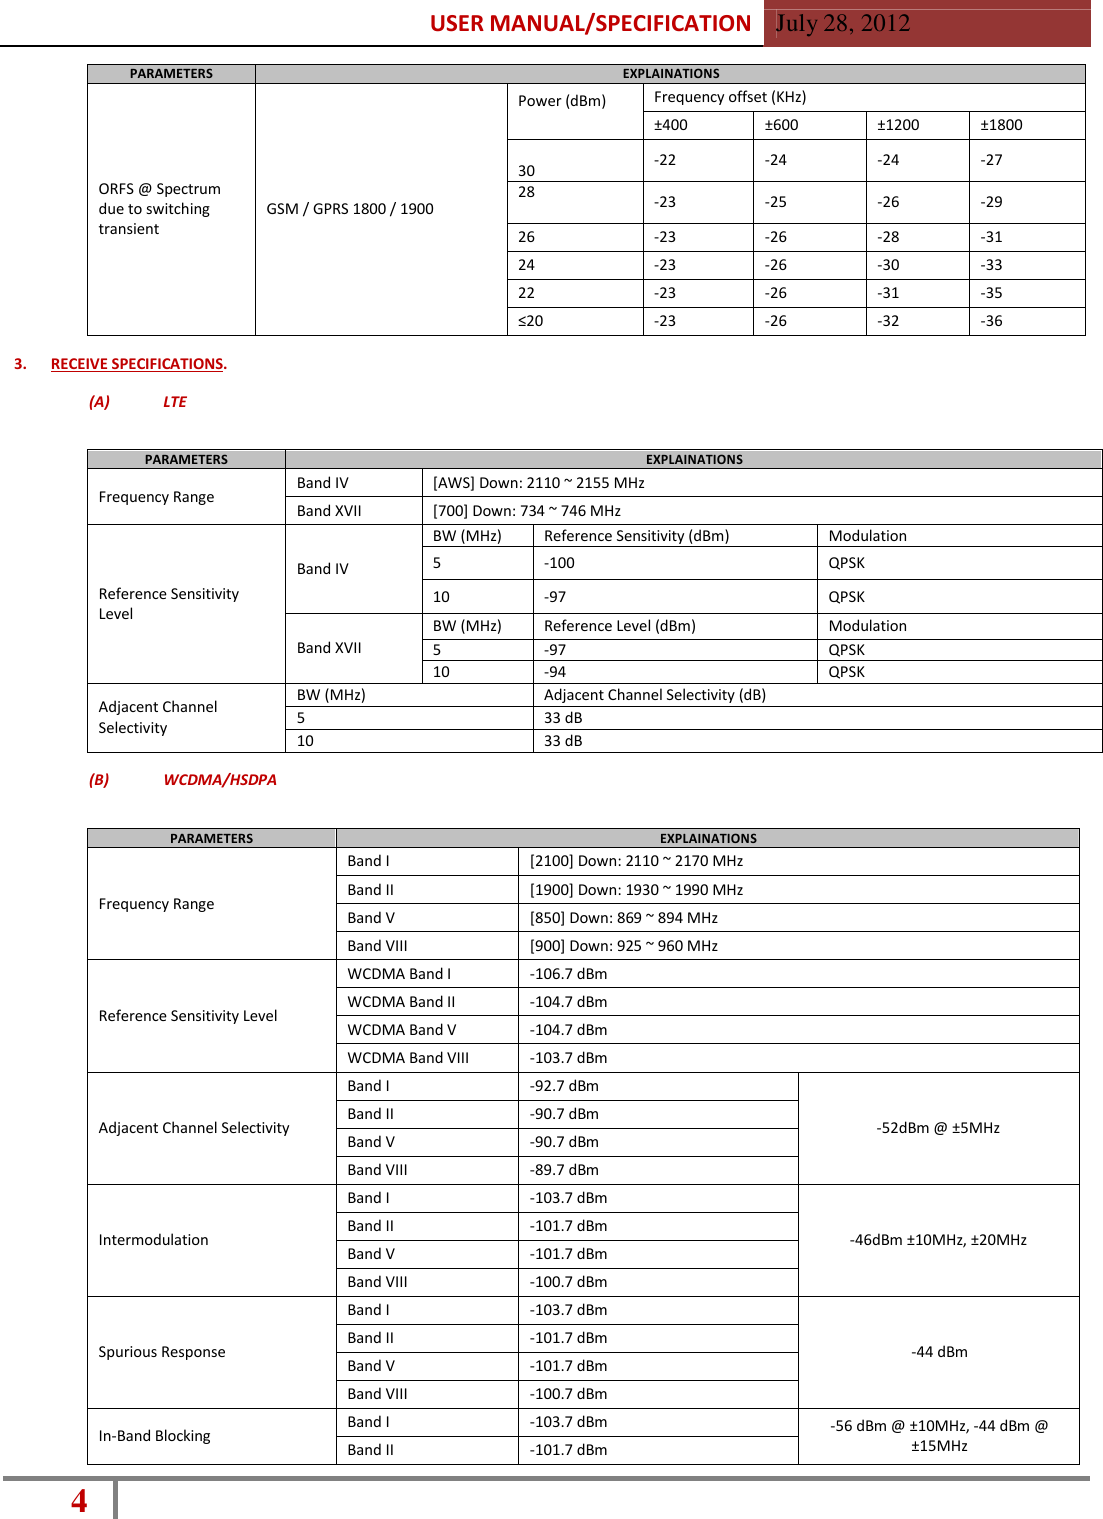 USER MANUAL/SPECIFICATION  July 28, 2012 4    PARAMETERS EXPLAINATIONS      ORFS @ Spectrum due to switching transient       GSM / GPRS 1800 / 1900 Power (dBm) Frequency offset (KHz) ±400 ±600 ±1200 ±1800  30 -22 -24 -24 -27 28 -23 -25 -26 -29 26 -23 -26 -28 -31 24 -23 -26 -30 -33 22 -23 -26 -31 -35 ≤20 -23 -26 -32 -36  3. RECEIVE SPECIFICATIONS.  (A)  LTE   PARAMETERS EXPLAINATIONS  Frequency Range Band IV [AWS] Down: 2110 ~ 2155 MHz Band XVII [700] Down: 734 ~ 746 MHz    Reference Sensitivity Level   Band IV BW (MHz) Reference Sensitivity (dBm) Modulation 5 -100 QPSK 10 -97 QPSK  Band XVII BW (MHz) Reference Level (dBm) Modulation 5 -97 QPSK 10 -94 QPSK  Adjacent Channel Selectivity BW (MHz) Adjacent Channel Selectivity (dB) 5 33 dB 10 33 dB  (B)  WCDMA/HSDPA   PARAMETERS EXPLAINATIONS   Frequency Range Band I [2100] Down: 2110 ~ 2170 MHz Band II [1900] Down: 1930 ~ 1990 MHz Band V [850] Down: 869 ~ 894 MHz Band VIII [900] Down: 925 ~ 960 MHz   Reference Sensitivity Level WCDMA Band I -106.7 dBm WCDMA Band II -104.7 dBm WCDMA Band V -104.7 dBm WCDMA Band VIII -103.7 dBm   Adjacent Channel Selectivity Band I -92.7 dBm   -52dBm @ ±5MHz Band II -90.7 dBm Band V -90.7 dBm Band VIII -89.7 dBm   Intermodulation Band I -103.7 dBm   -46dBm ±10MHz, ±20MHz Band II -101.7 dBm Band V -101.7 dBm Band VIII -100.7 dBm   Spurious Response Band I -103.7 dBm   -44 dBm Band II -101.7 dBm Band V -101.7 dBm Band VIII -100.7 dBm  In-Band Blocking Band I -103.7 dBm -56 dBm @ ±10MHz, -44 dBm @ ±15MHz Band II -101.7 dBm 